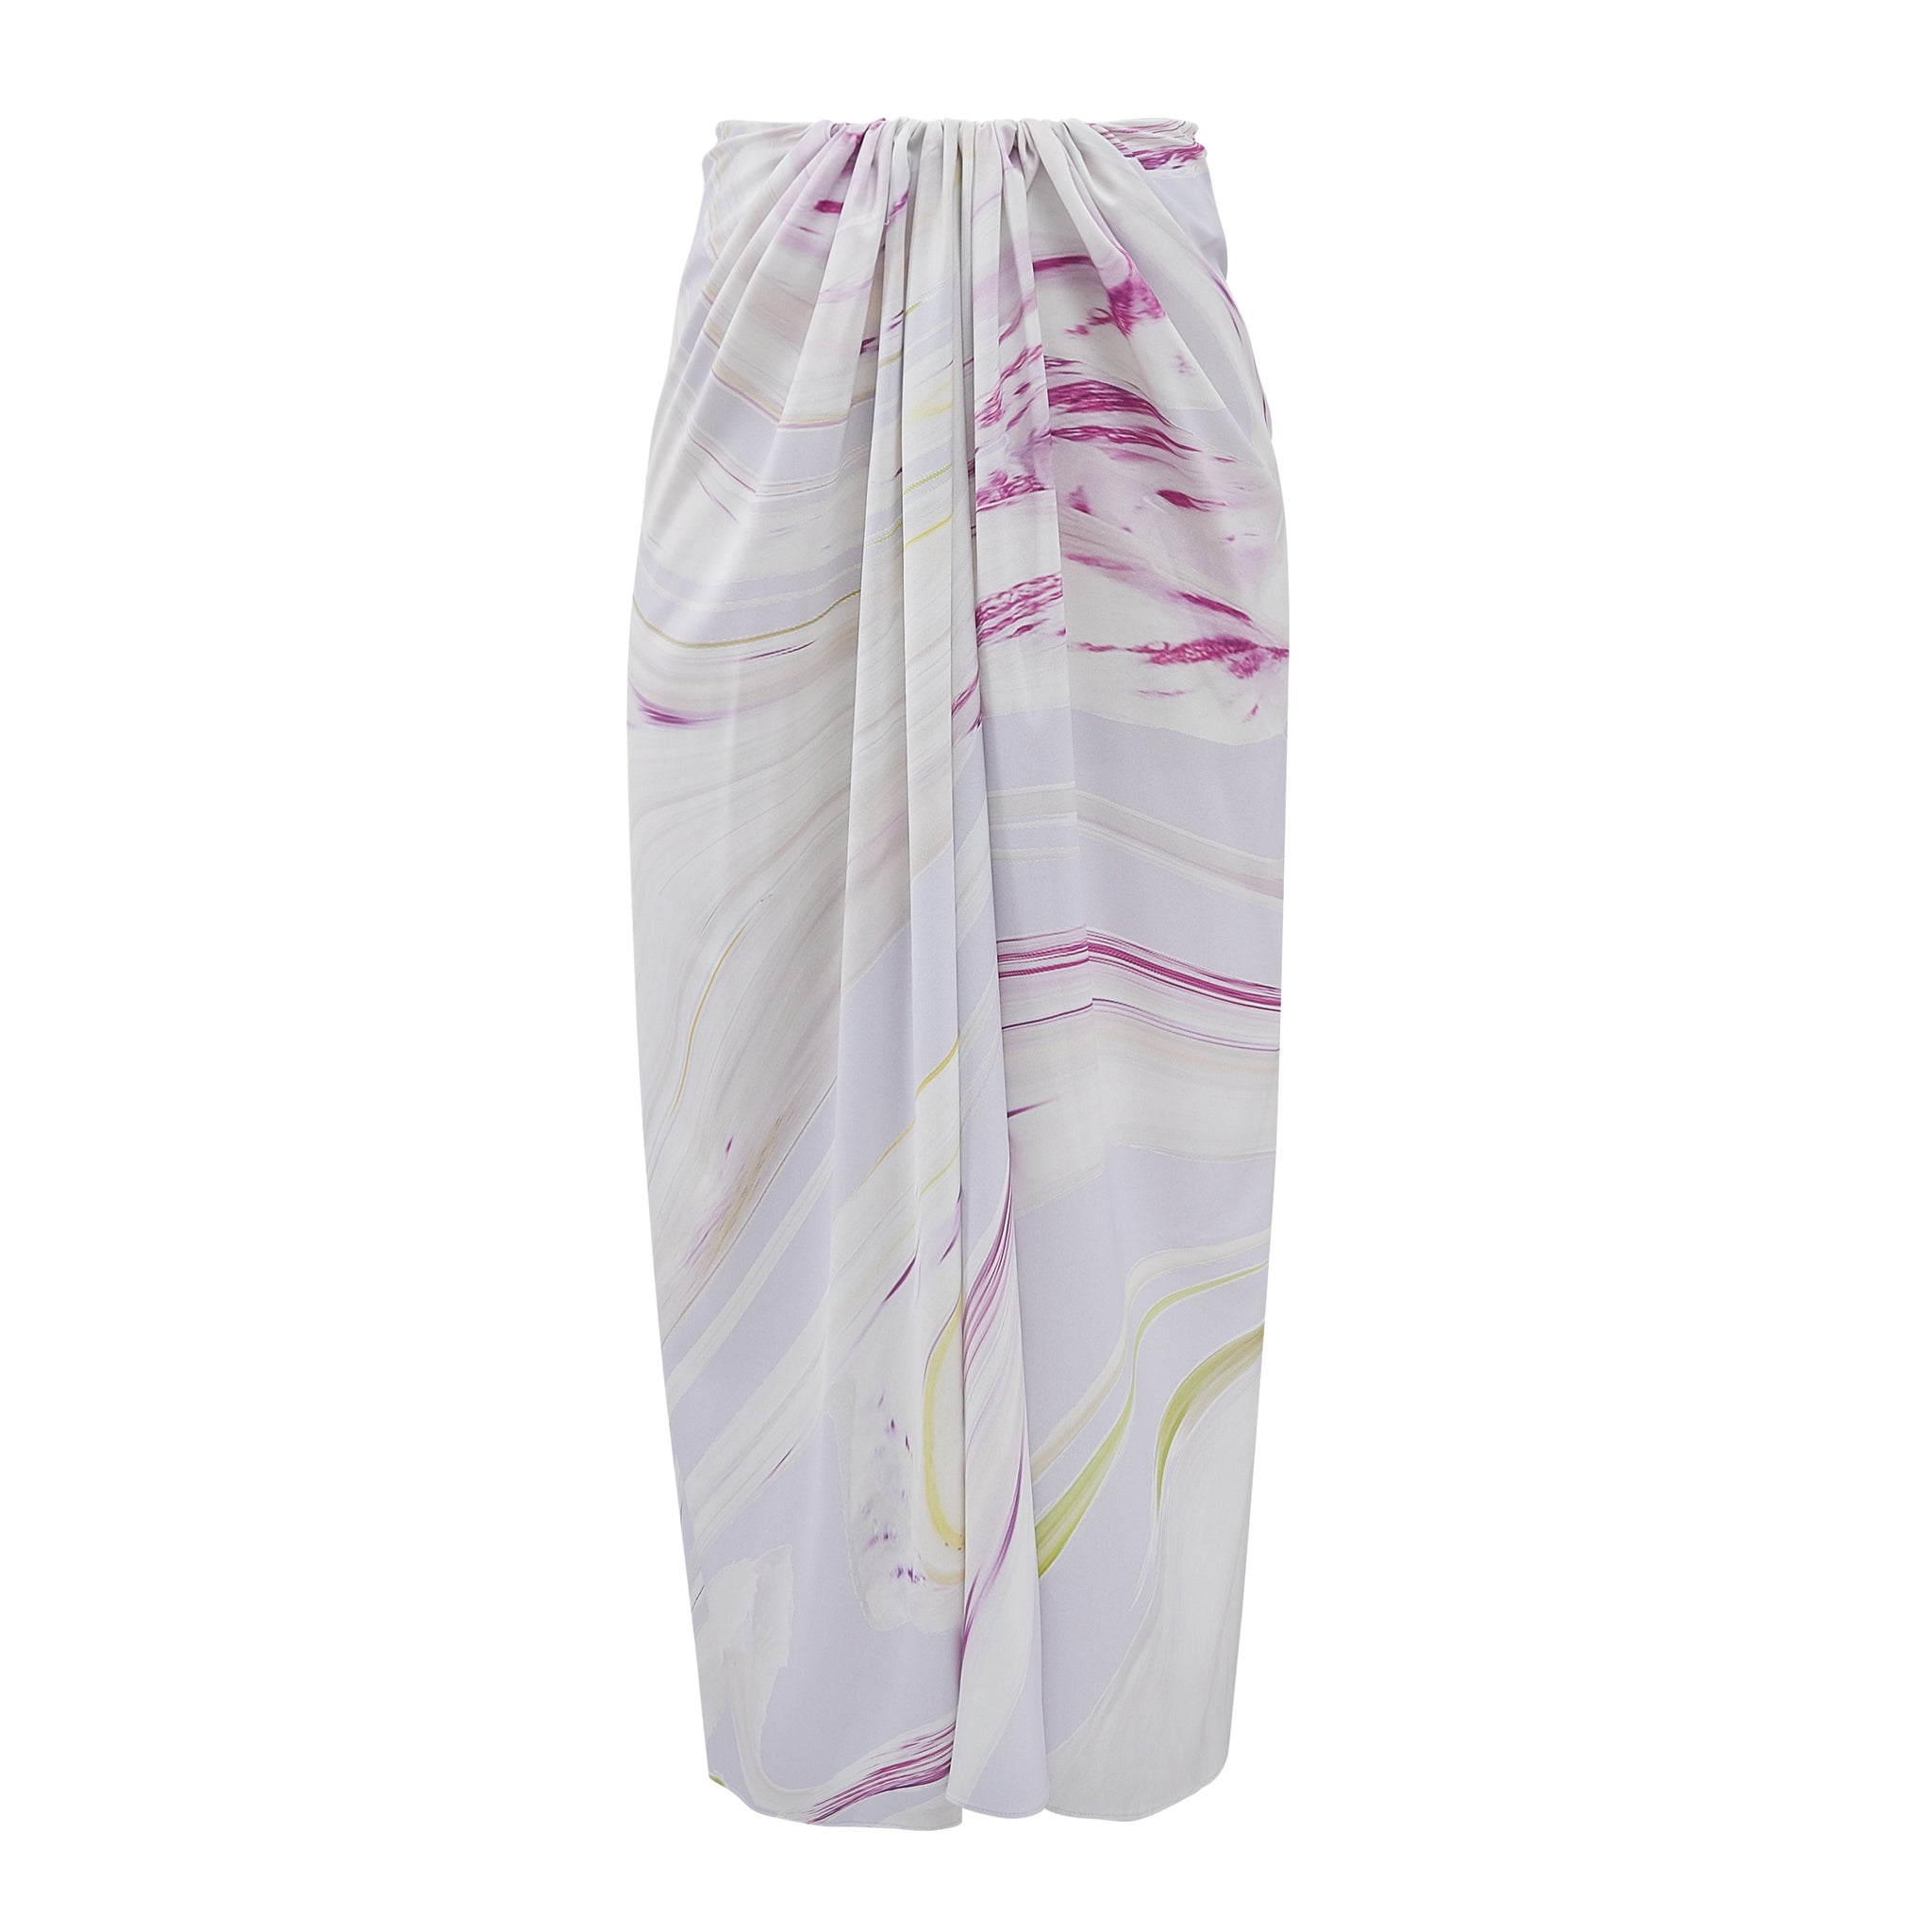 Ruche front skirt in lilac flower marble print